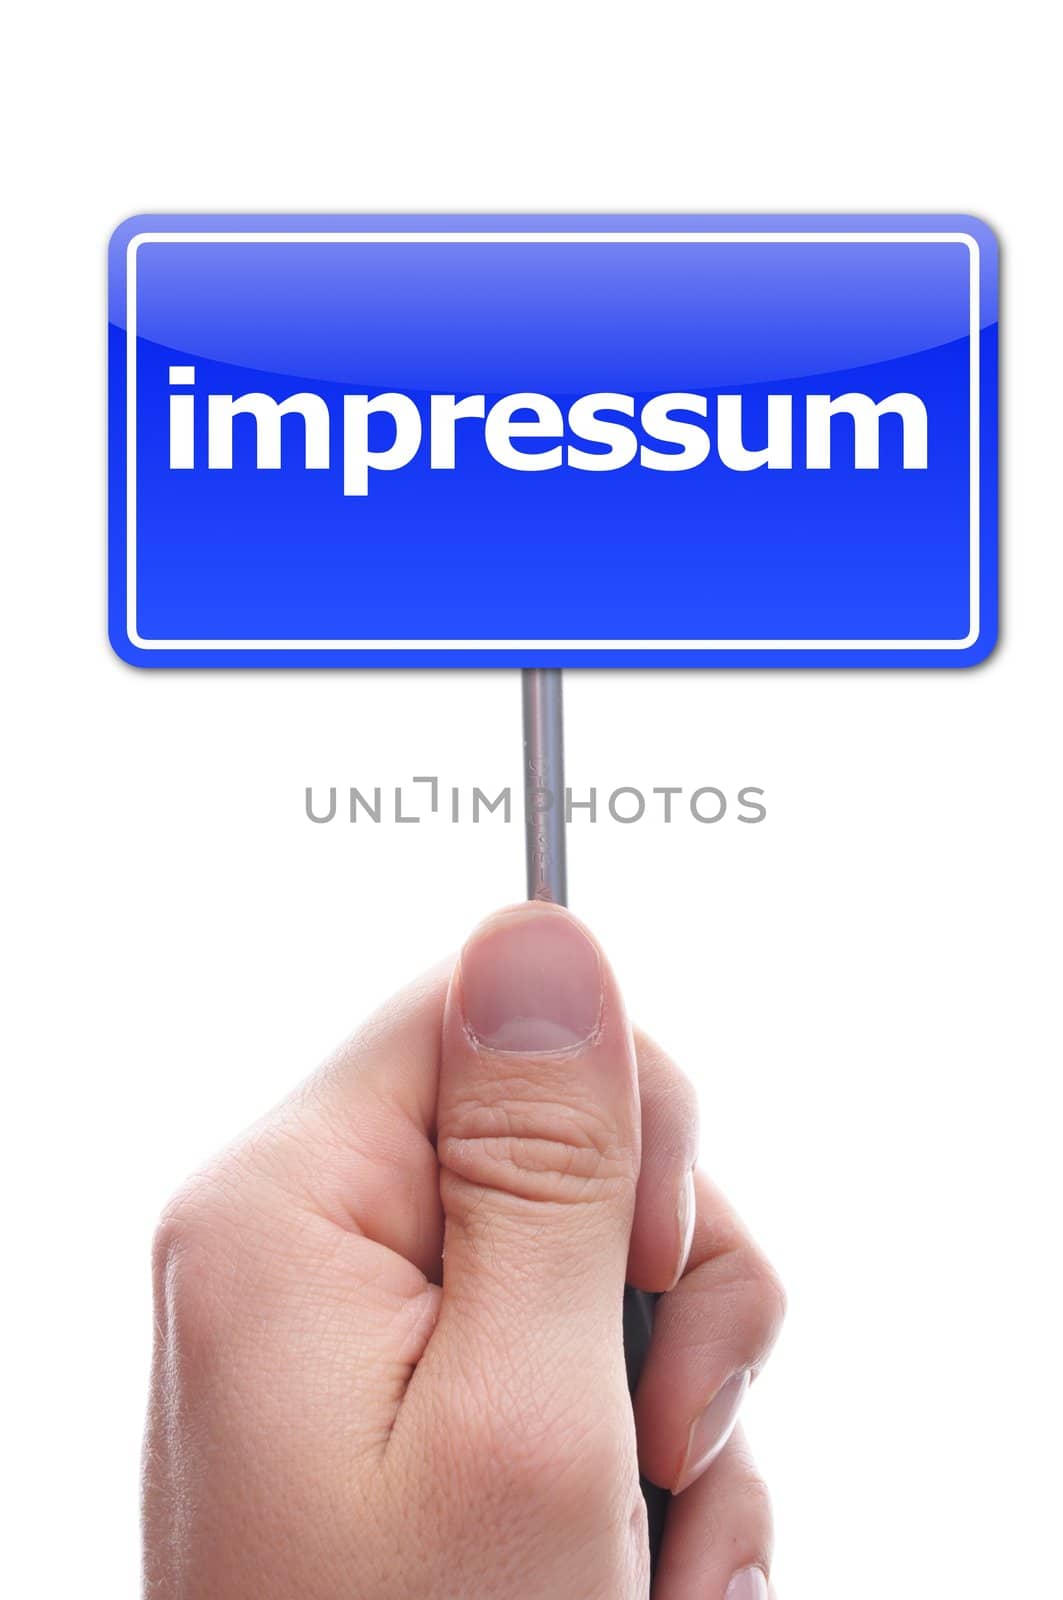 impressum concept with hand word and paper